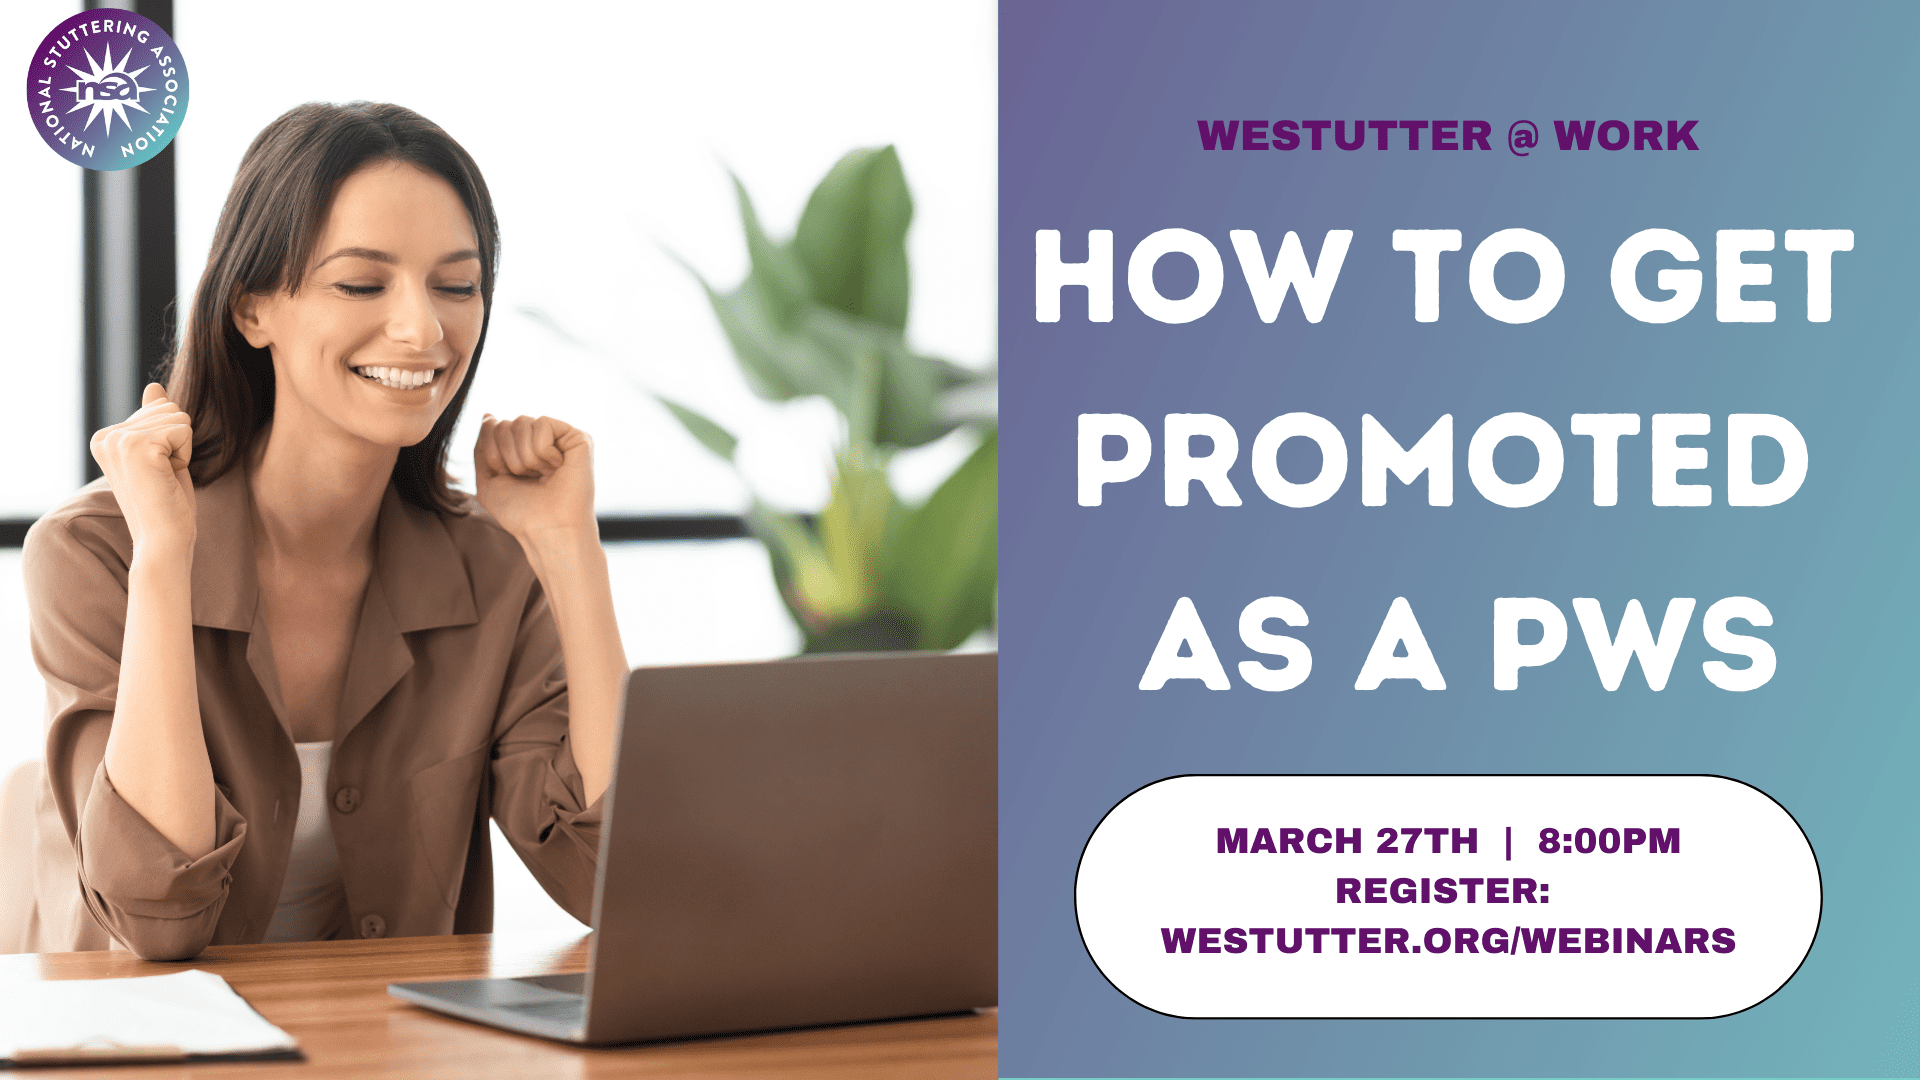 Workplace Webinar - How To Get Promoted As A PWS